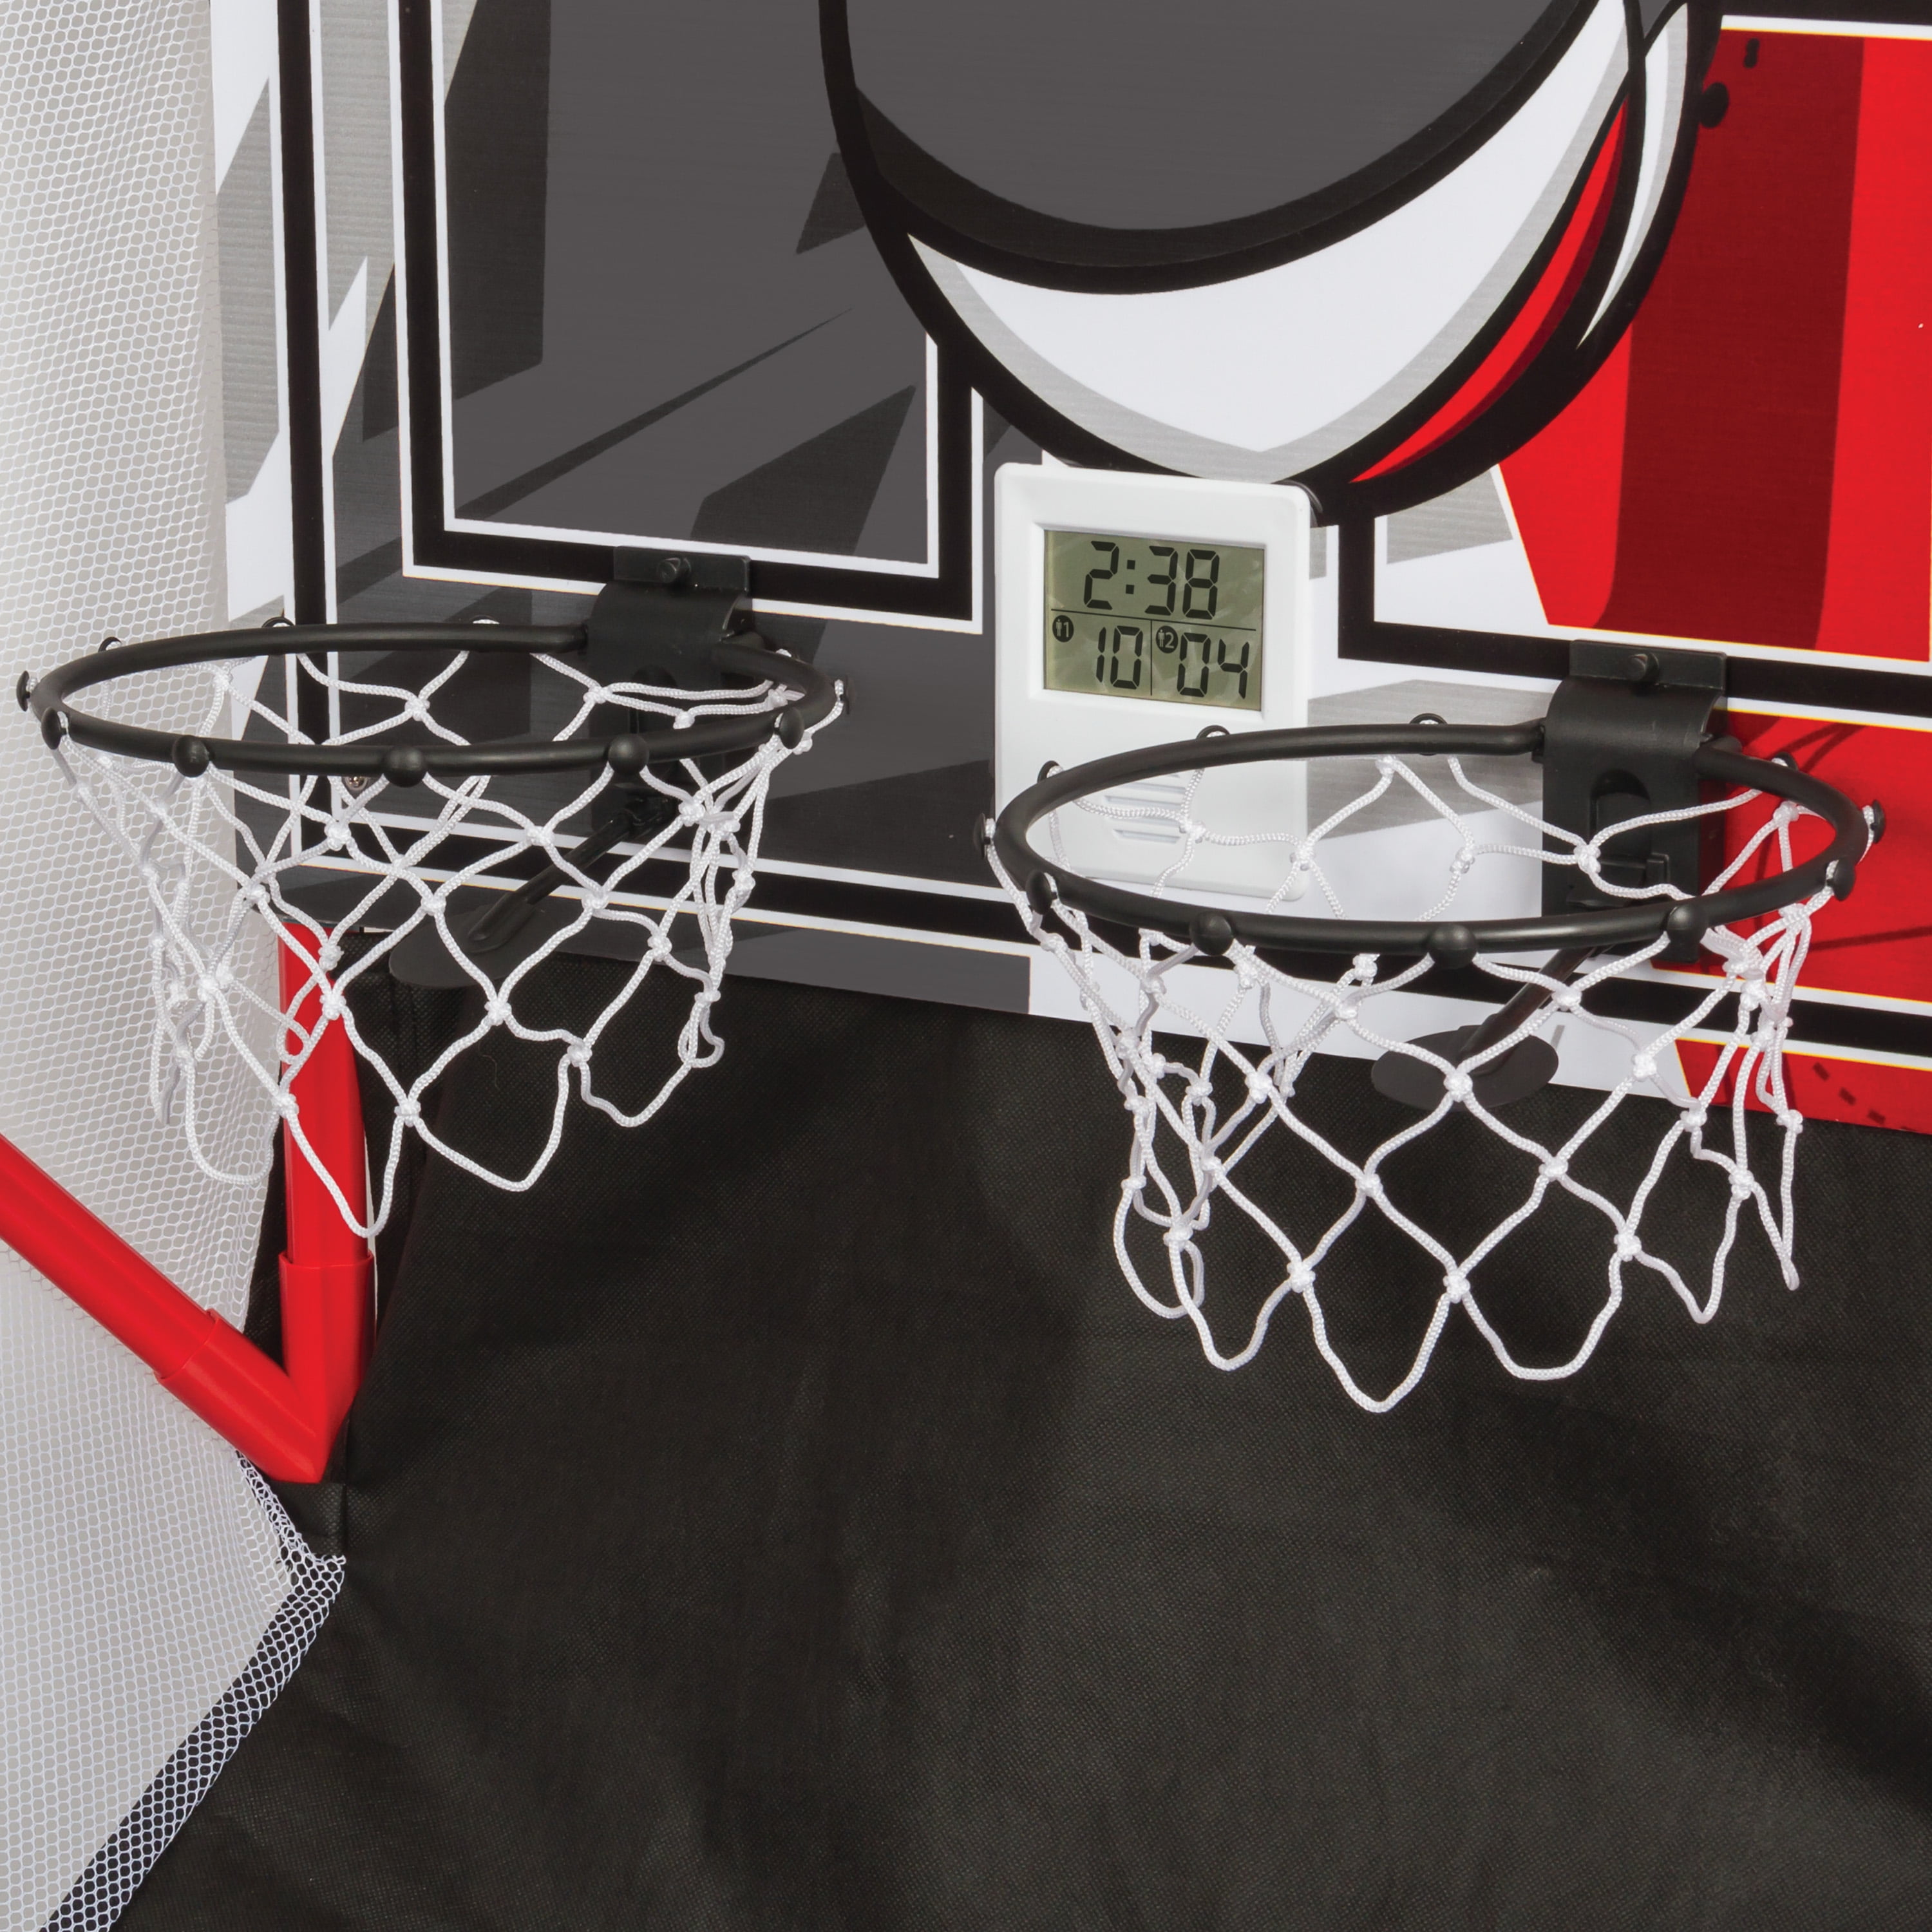 Details about   Multi-Sport Game 5-In-1 Arcade System Shooting Basketball Football Indoor Home 